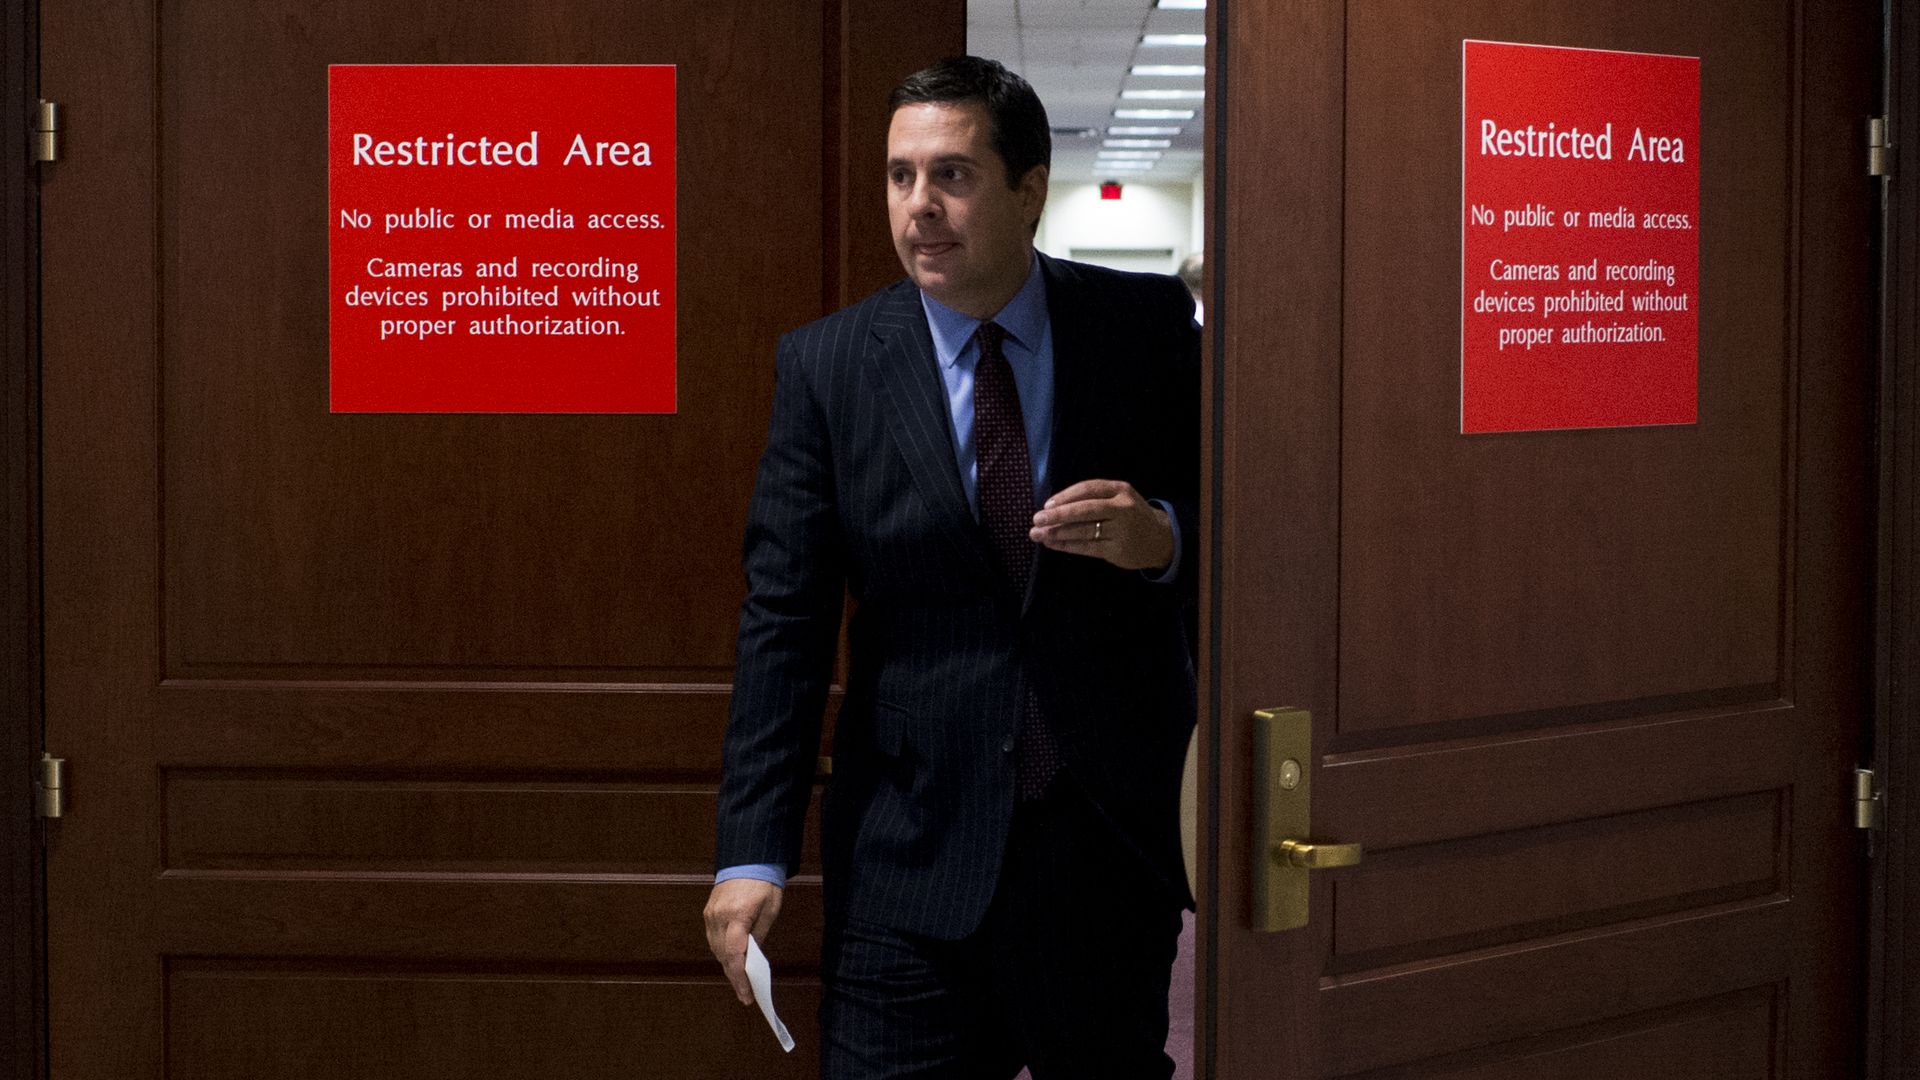 Devin Nunes exits a restricted area for the House Intelligence Committee's offices